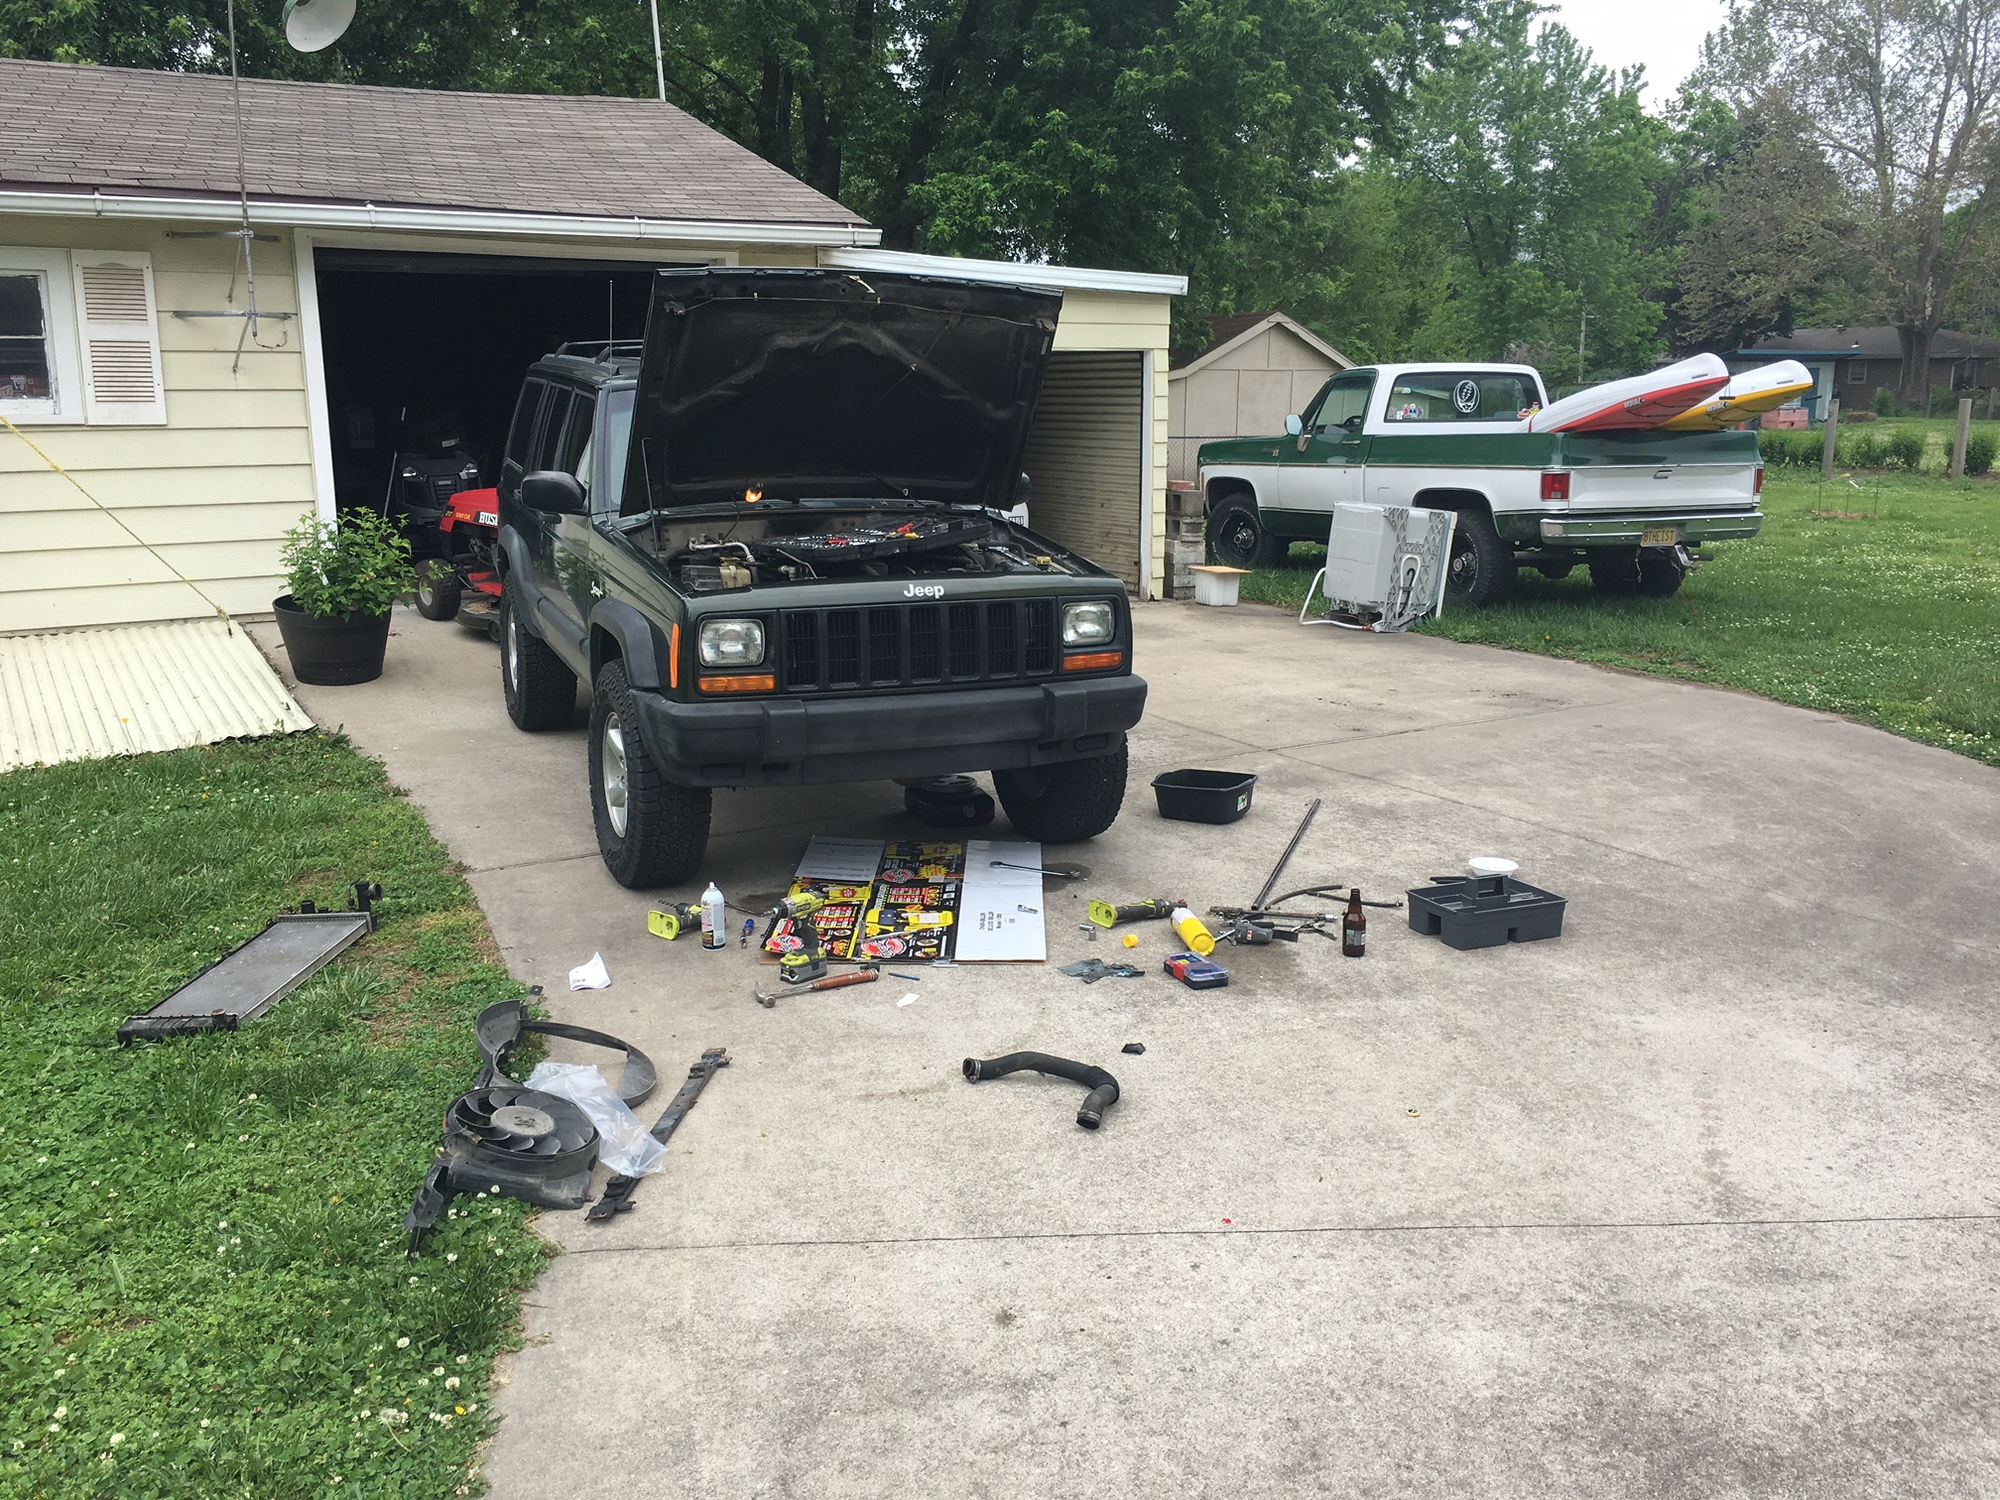 Project Cherokeeper: Blown Head Gasket! Time to Rebuild the Jeep